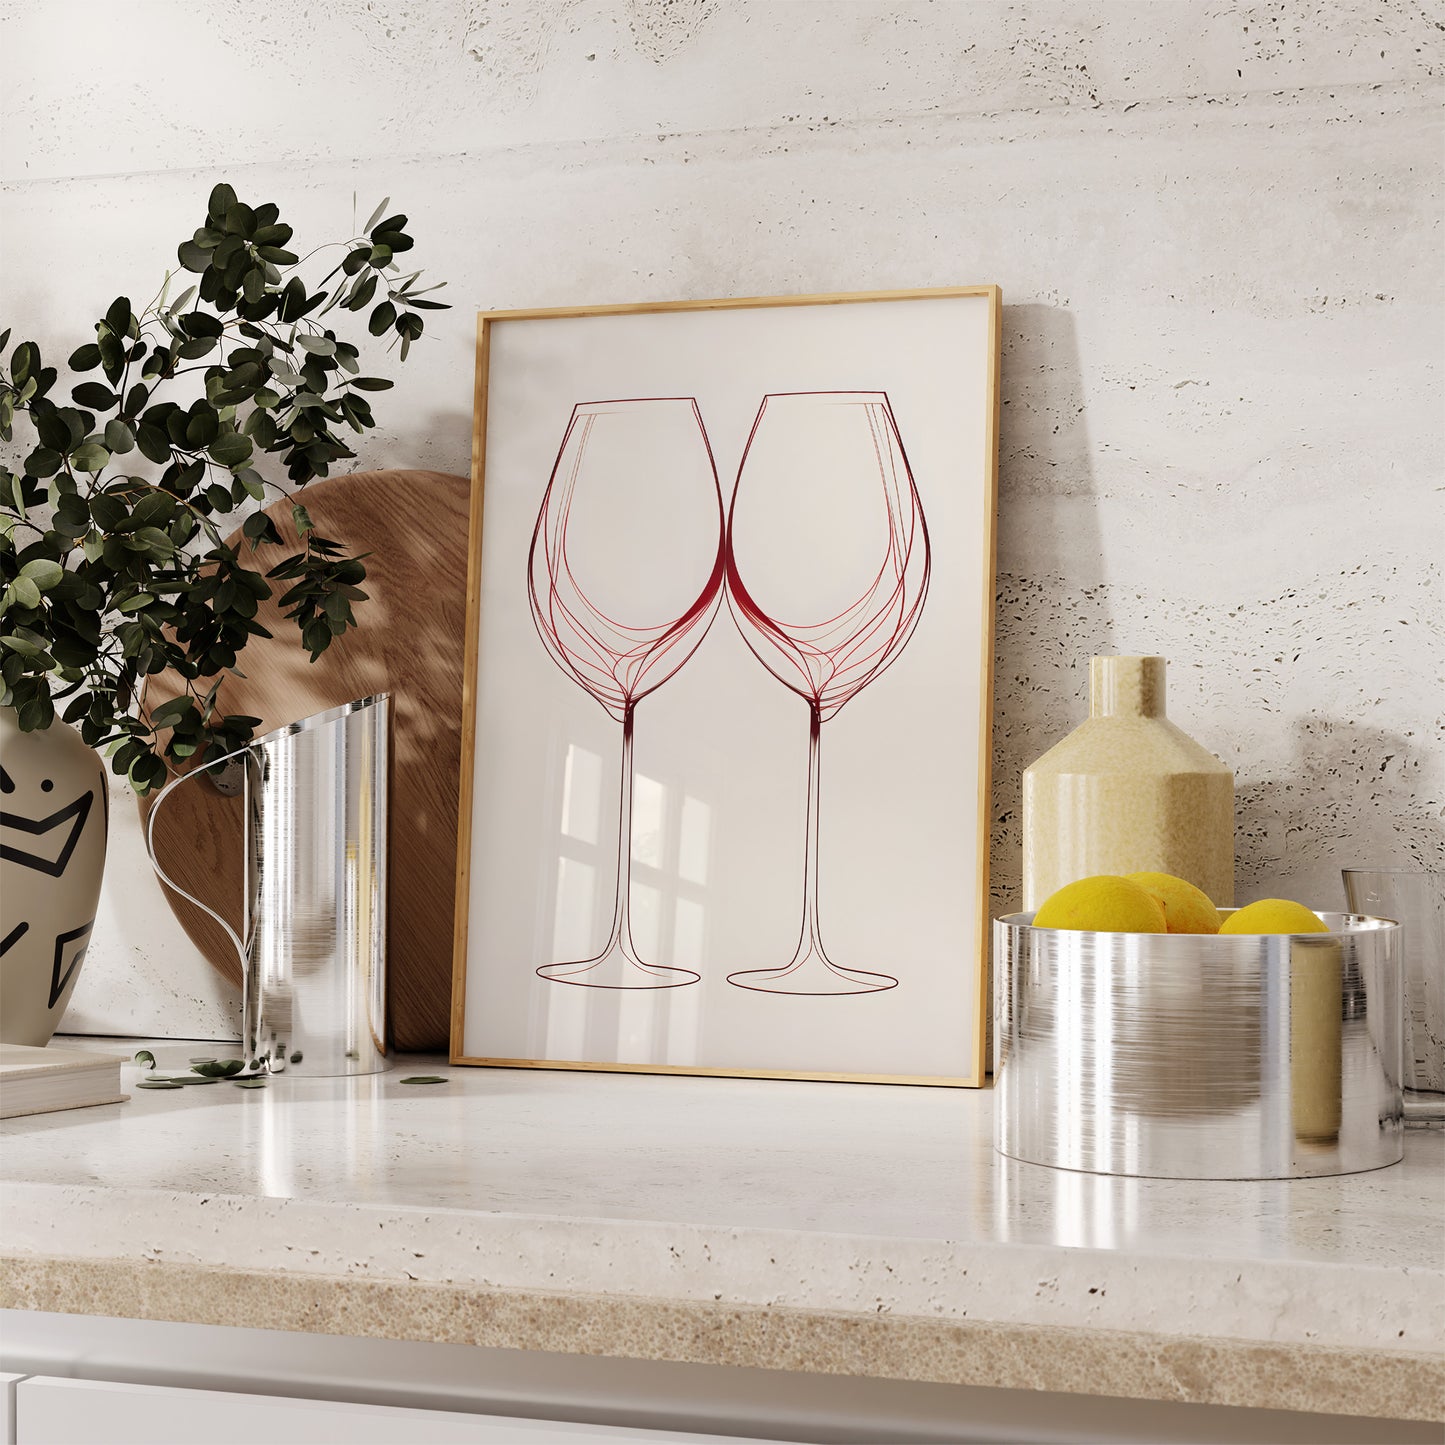 A framed sketch of wine glasses on a kitchen counter with decorative items.